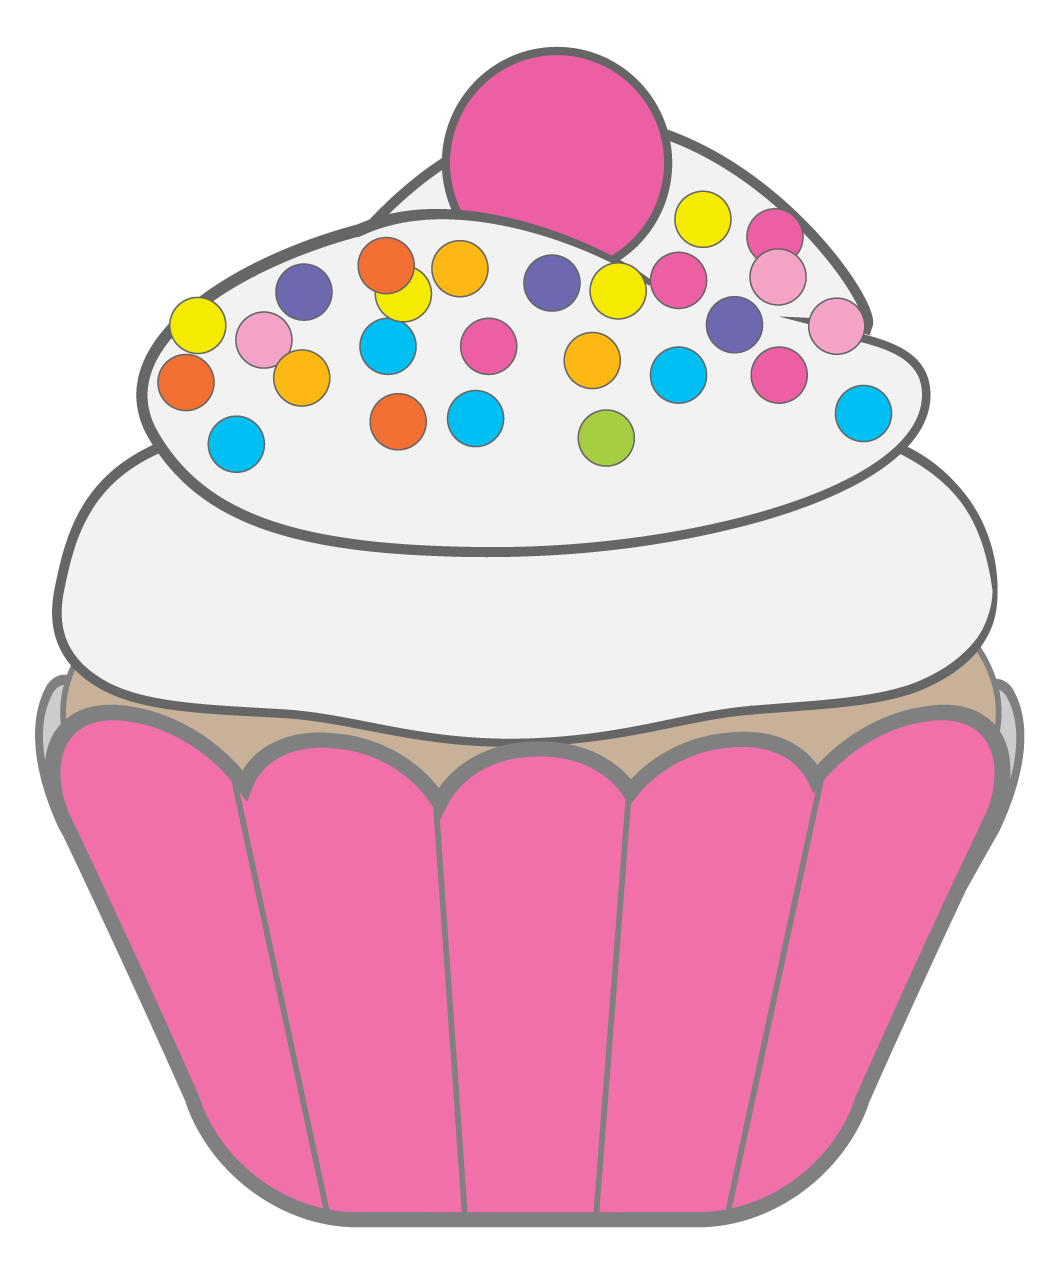 Pink Cupcakes With Sprinkles | Clipart Panda - Free Clipart Images